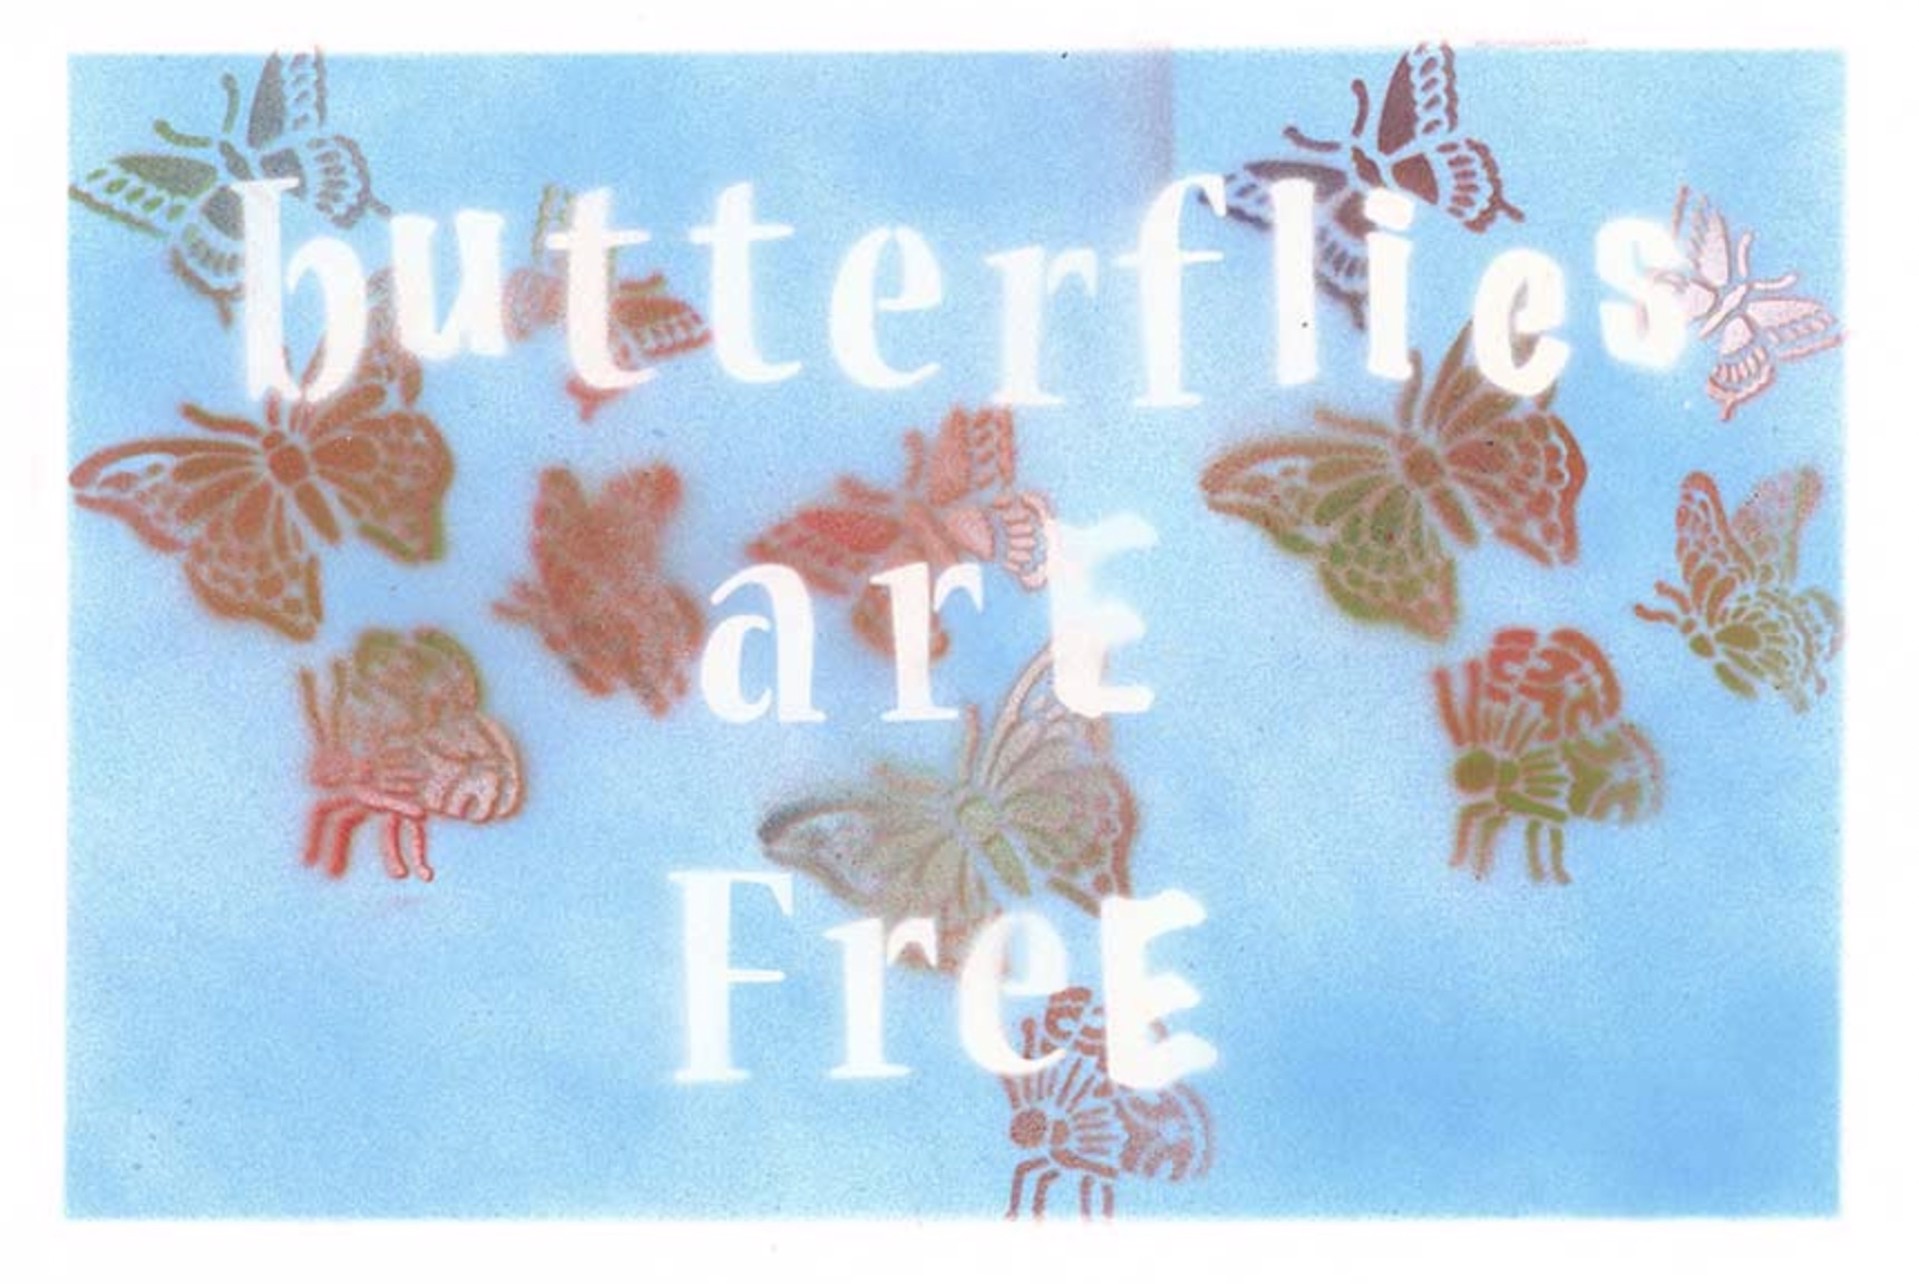 Butterflies Are Free by Bernie Taupin